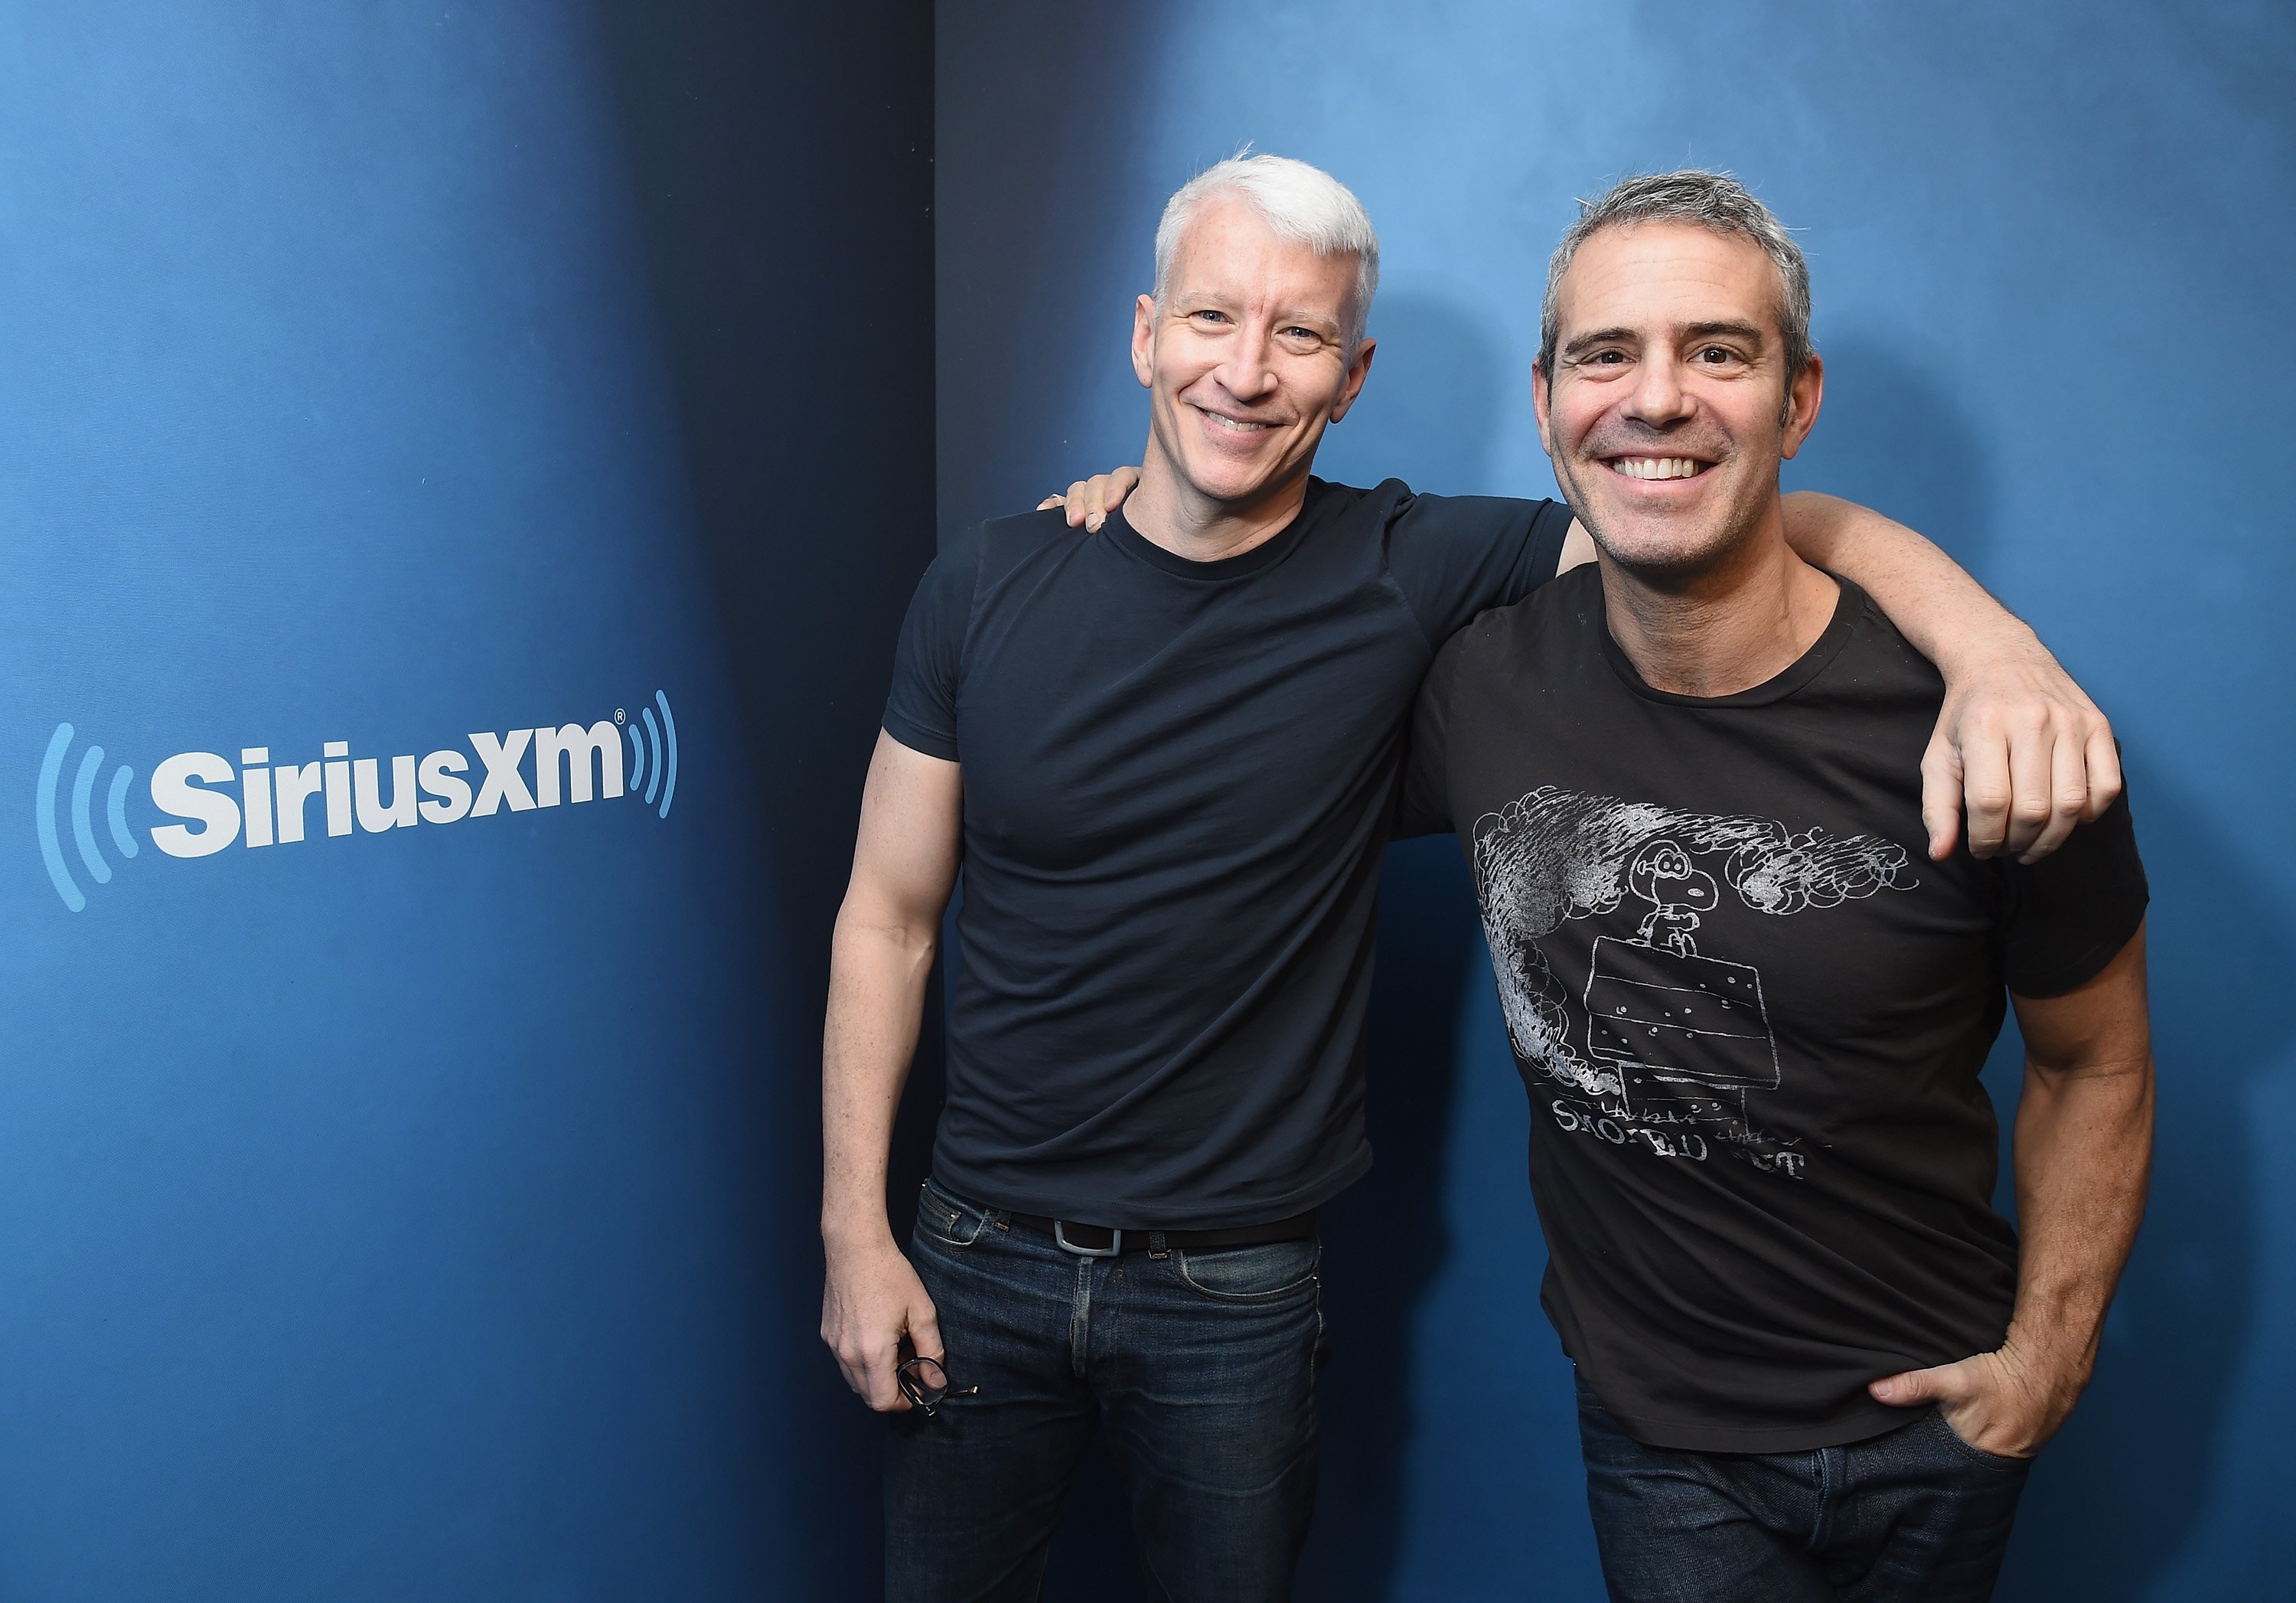 Anderson Cooper and host Andy Cohen at SiriusXM Studios on January 13, 2017, in New York City | Photo: Getty Images.